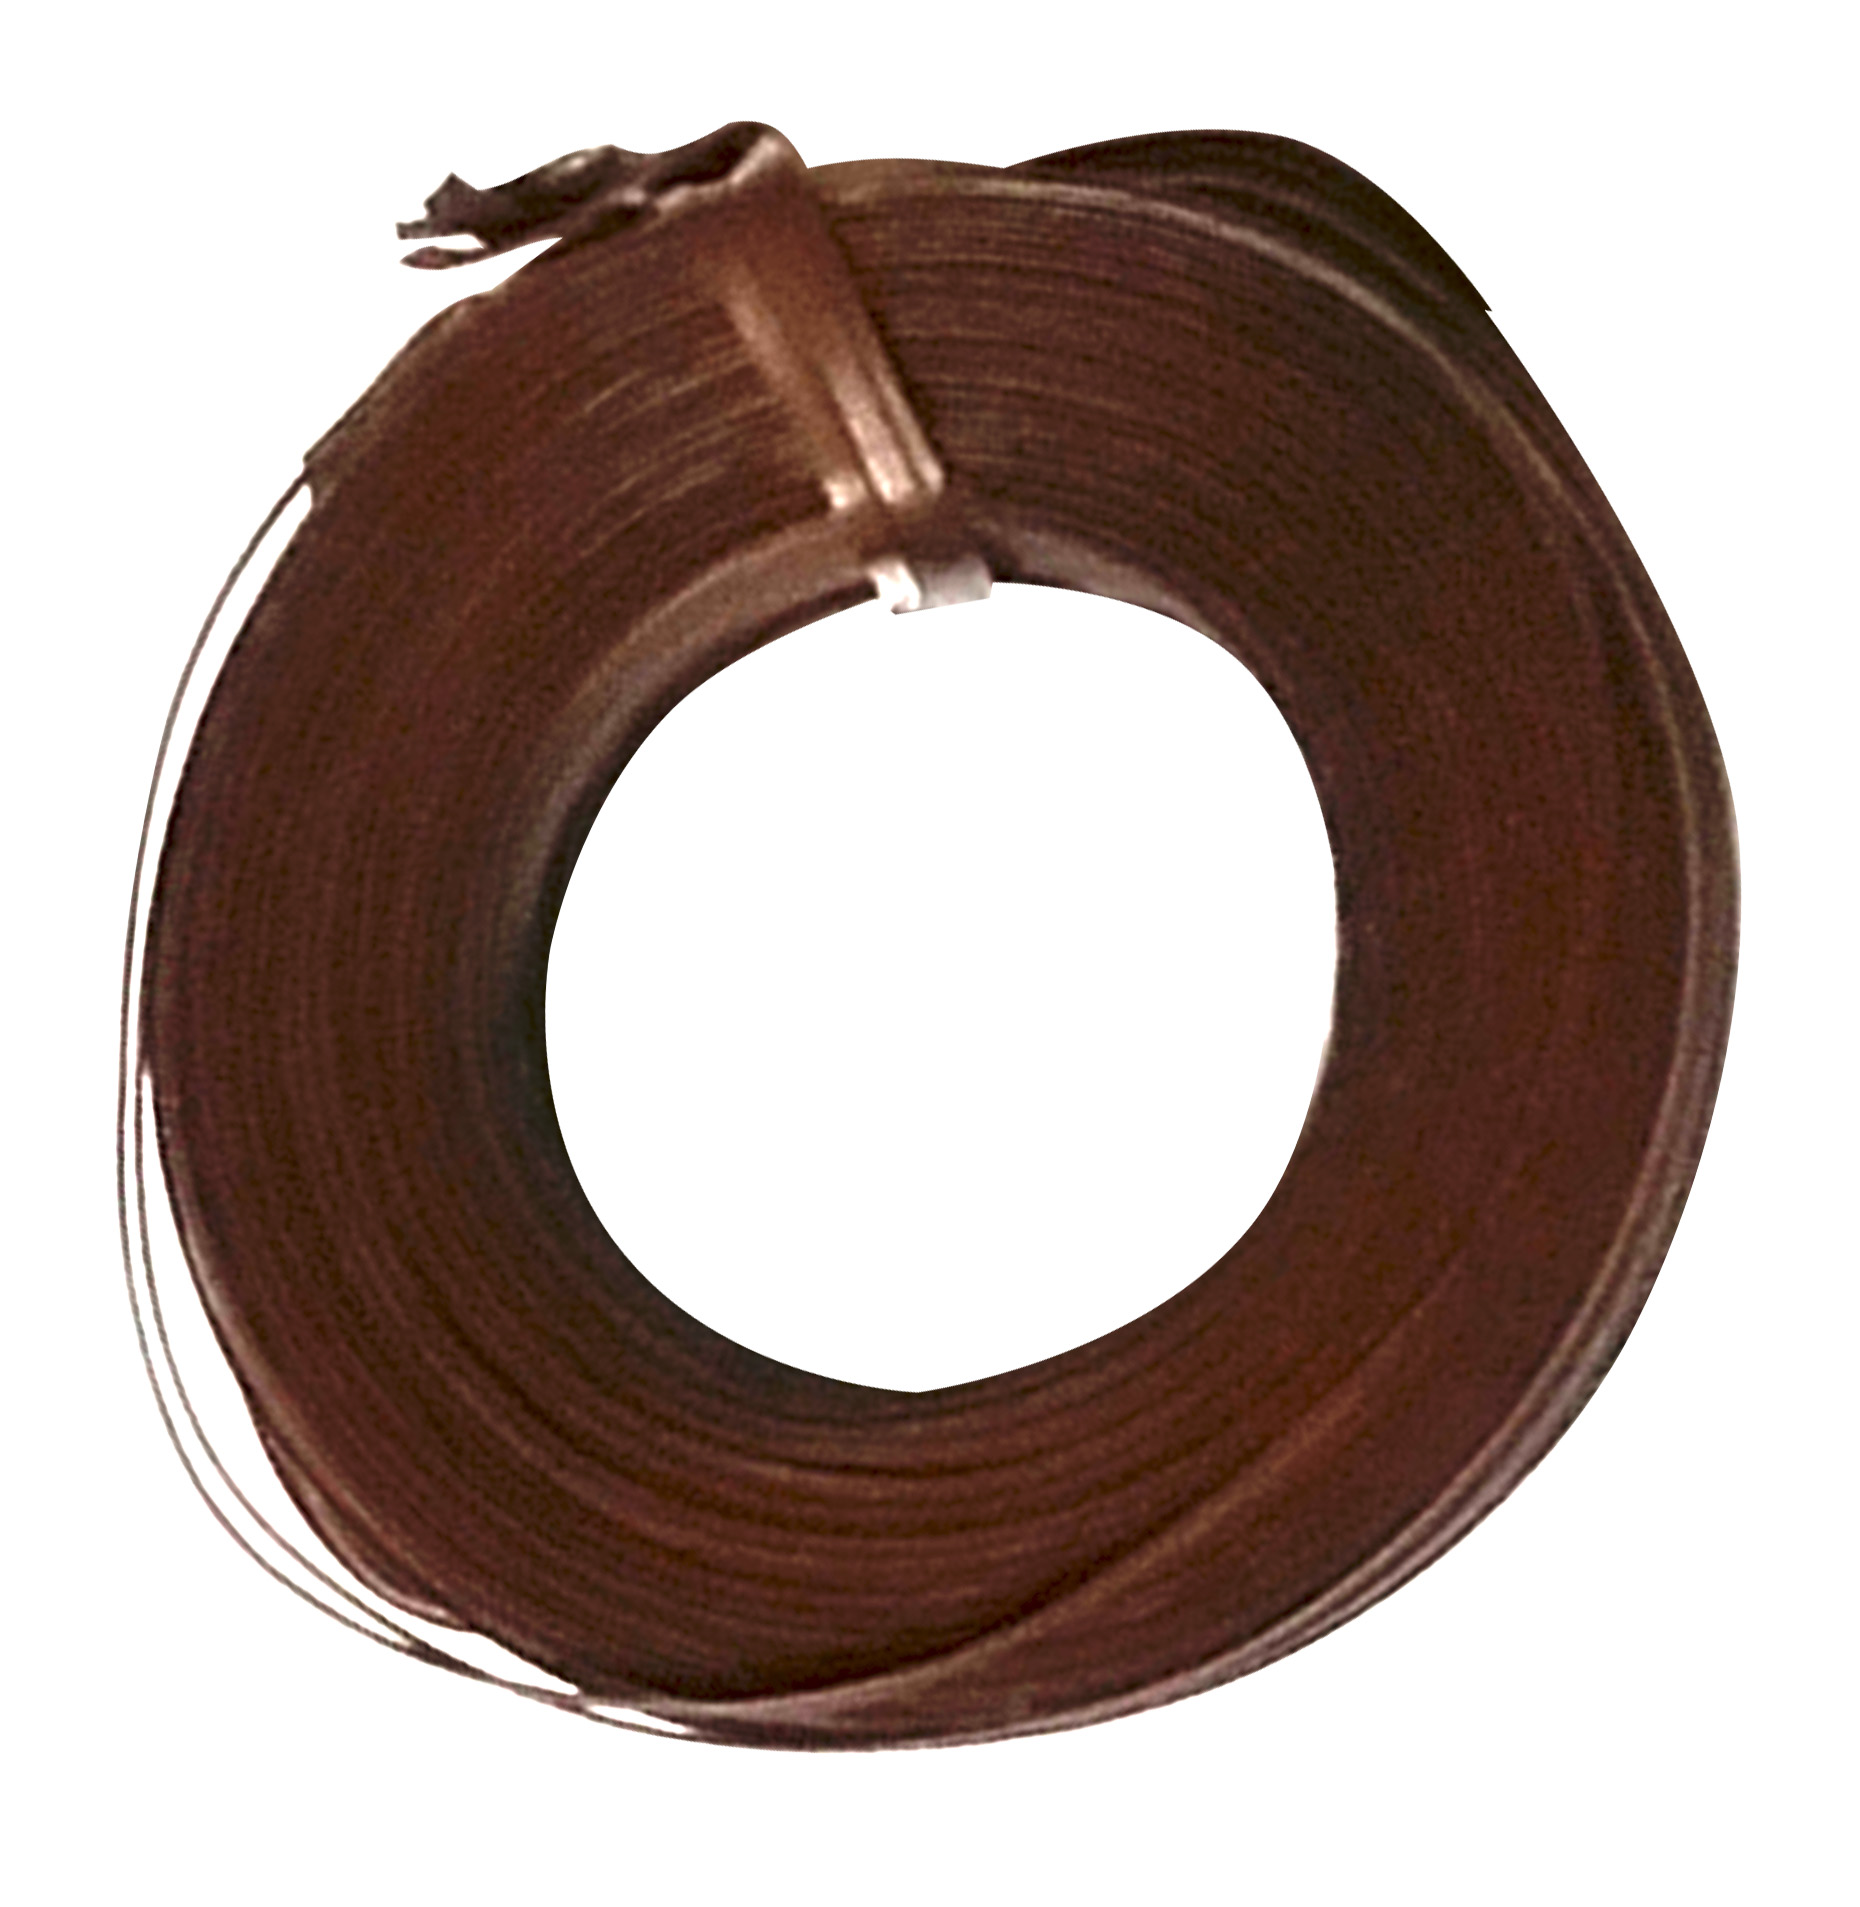 Zenport Electric Plant Tying Tool Tie Wire ET1-WIRE 295-Feet Brown PVC Covered Twist Tie Wire